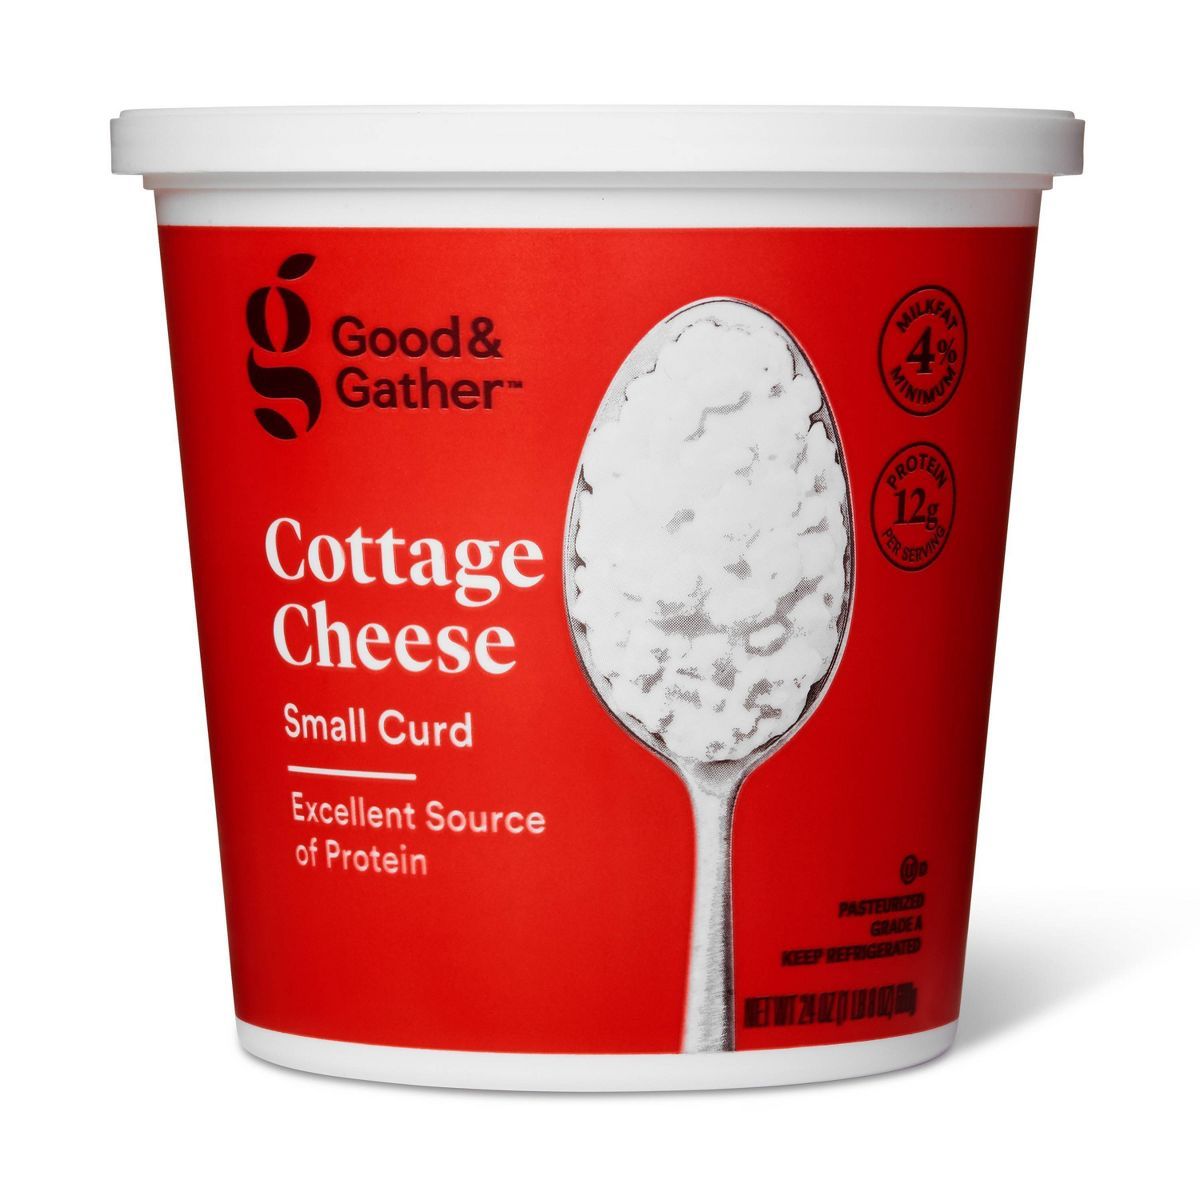 4% Milkfat Small Curd Cottage Cheese - 24oz - Good & Gather™ | Target